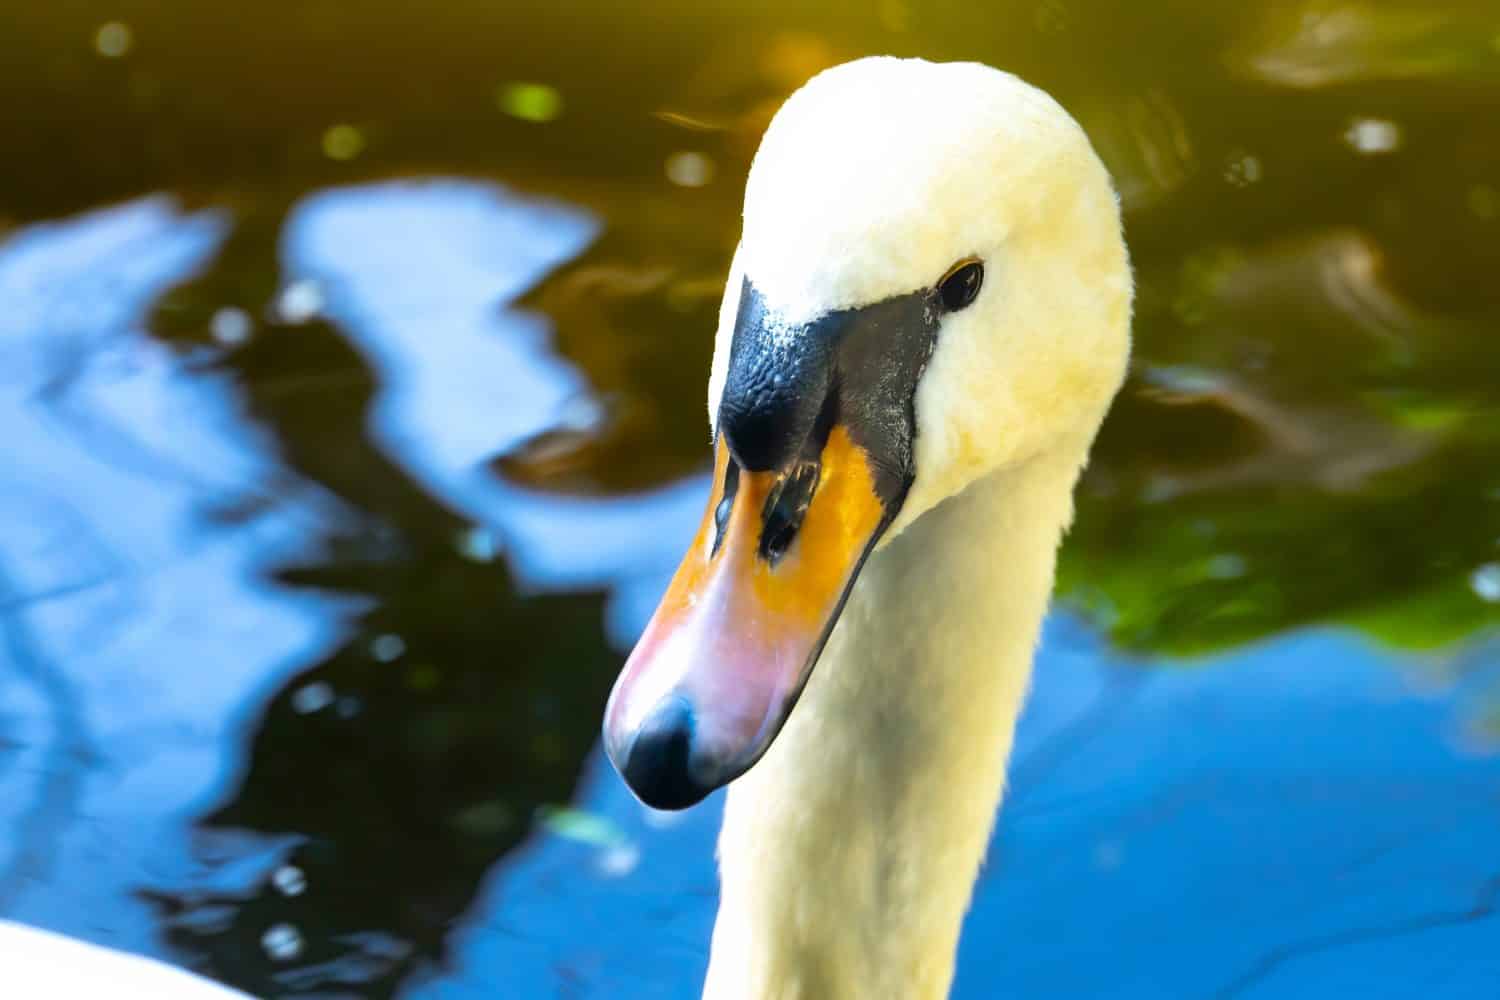 Closeup and Detail of Mute Swan Head and Beak with Beads of Water